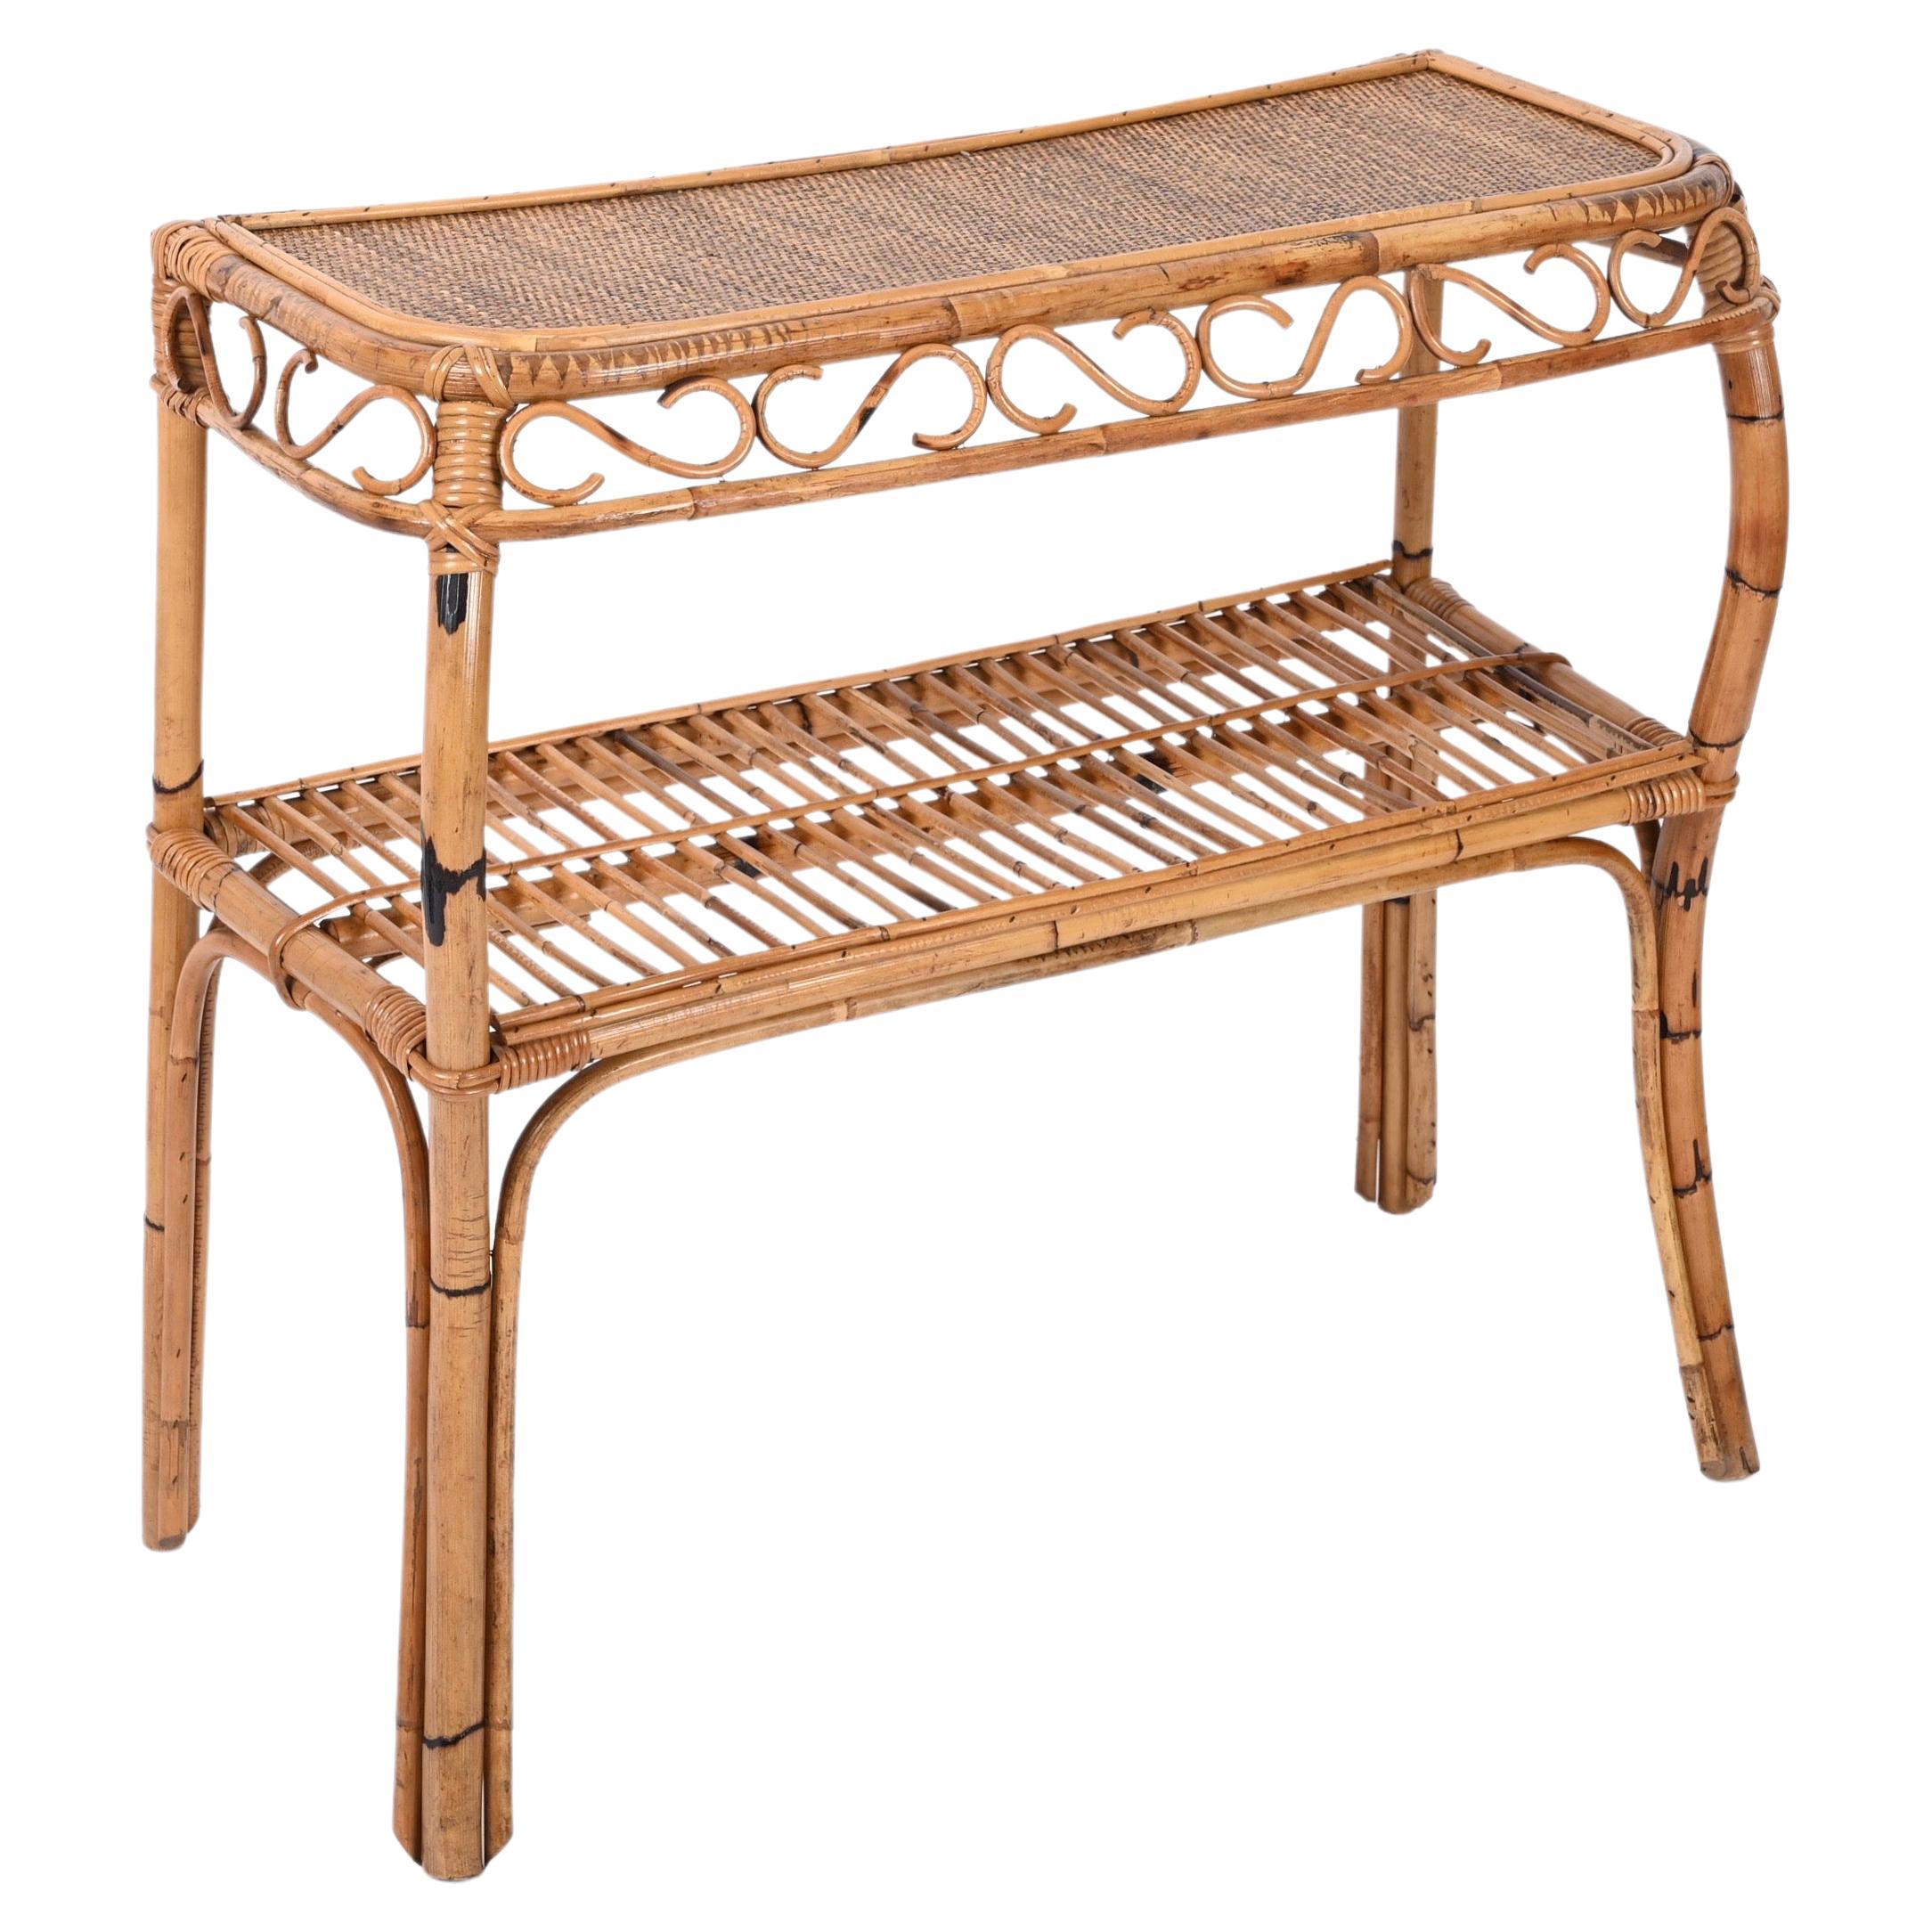 Gorgeous console table in bamboo and rattan. This amazing piece was designed in Italy during the 1960s and is attributed to Franco Albini. 

Fully handmade, perfect example of Italian manufacture from the 60s. 
The console has four beautiful